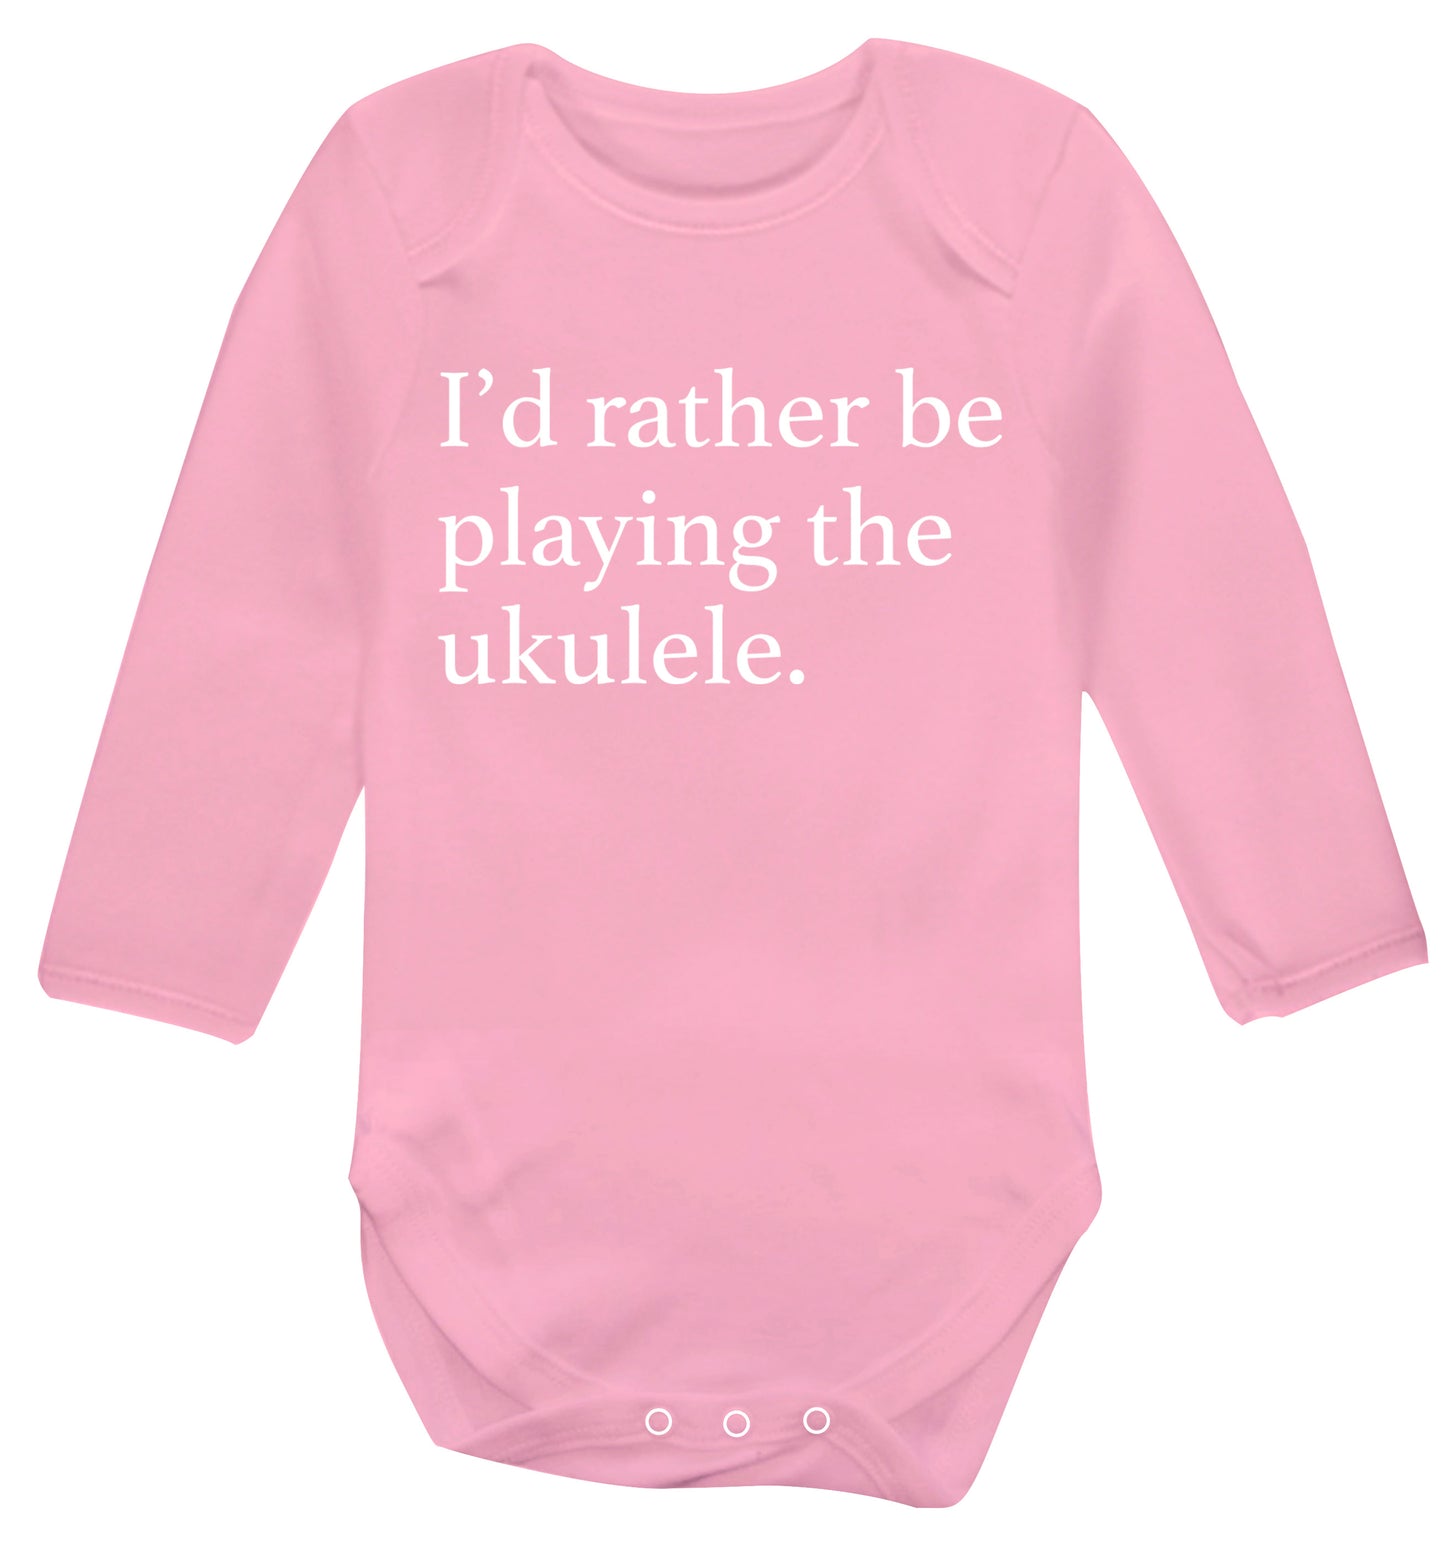 I'd rather by playing the ukulele Baby Vest long sleeved pale pink 6-12 months